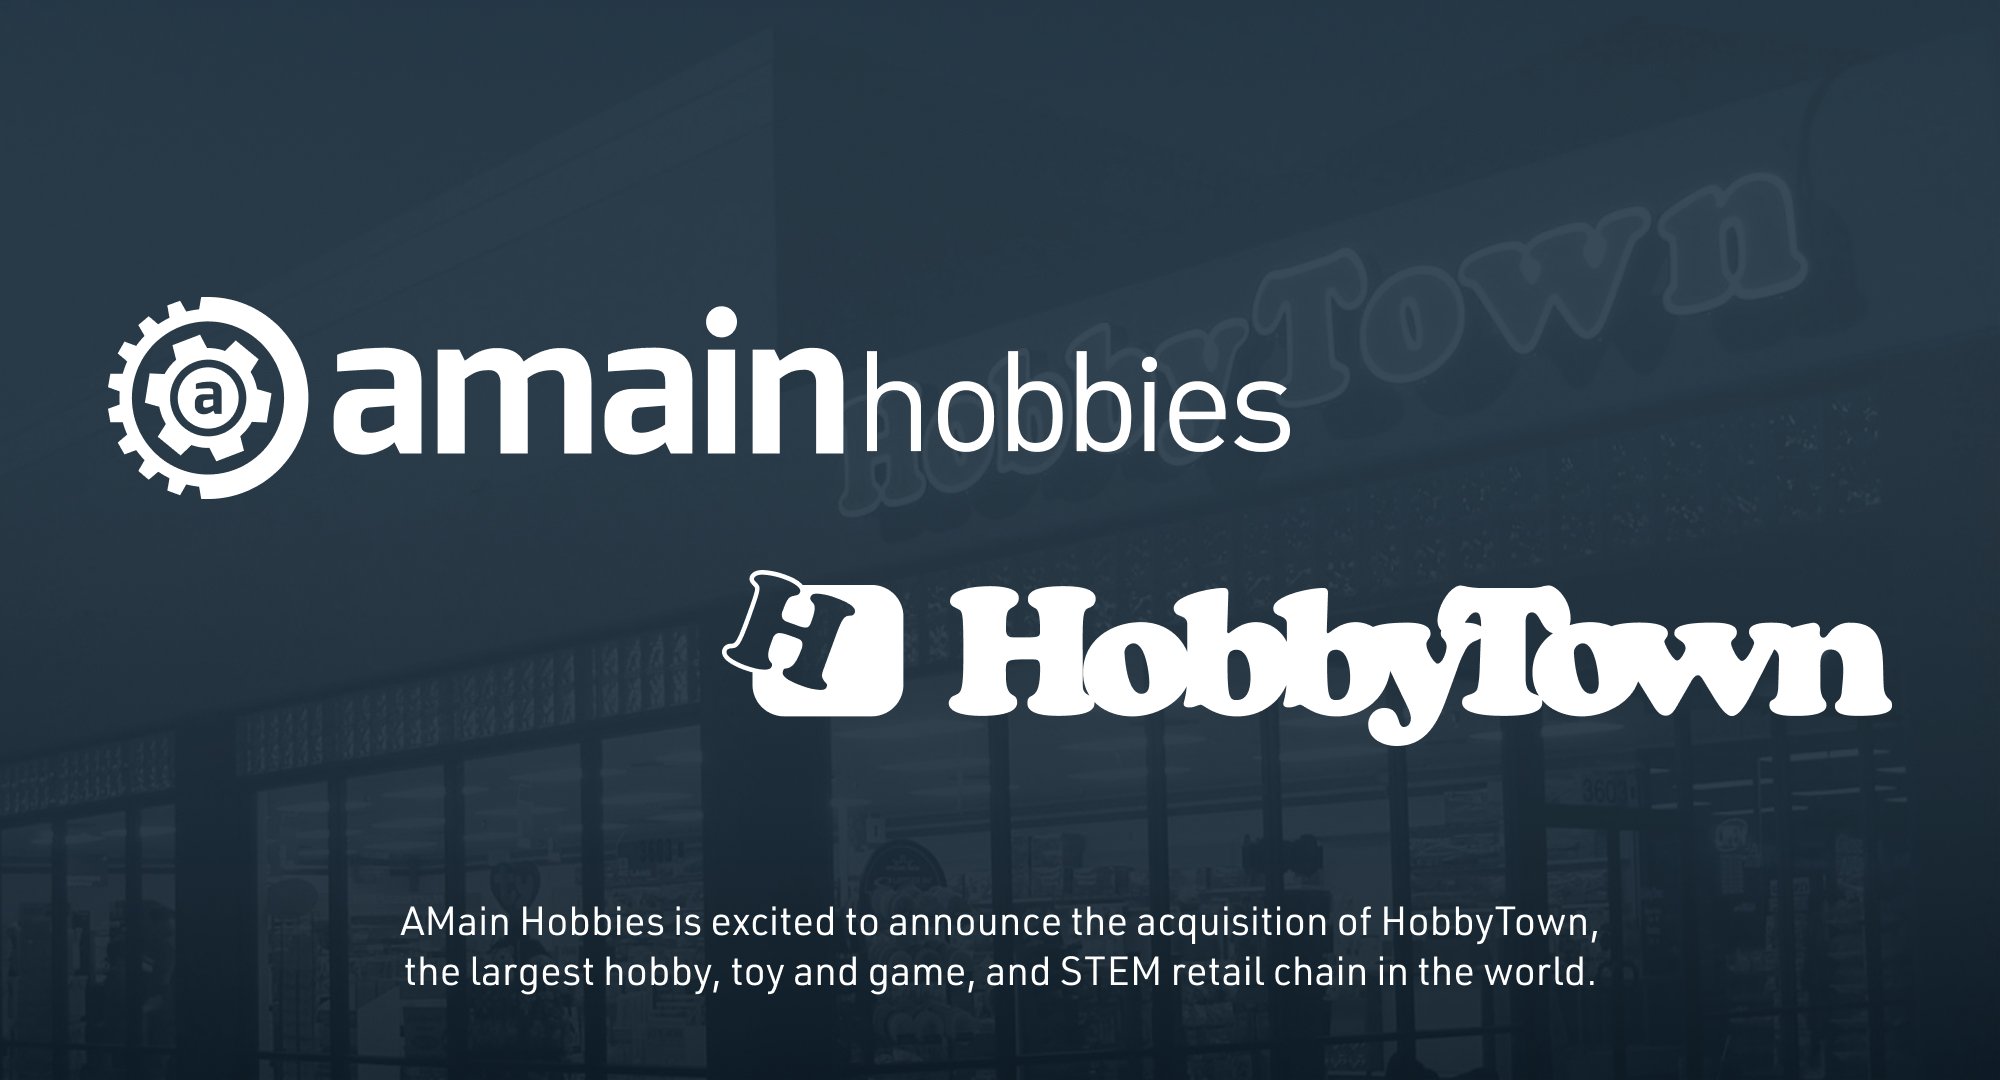 AMain Hobbies is excited to announce the acquisition of HobbyTown, the largest hobby, toy and game, and STEM retail chain in the world.